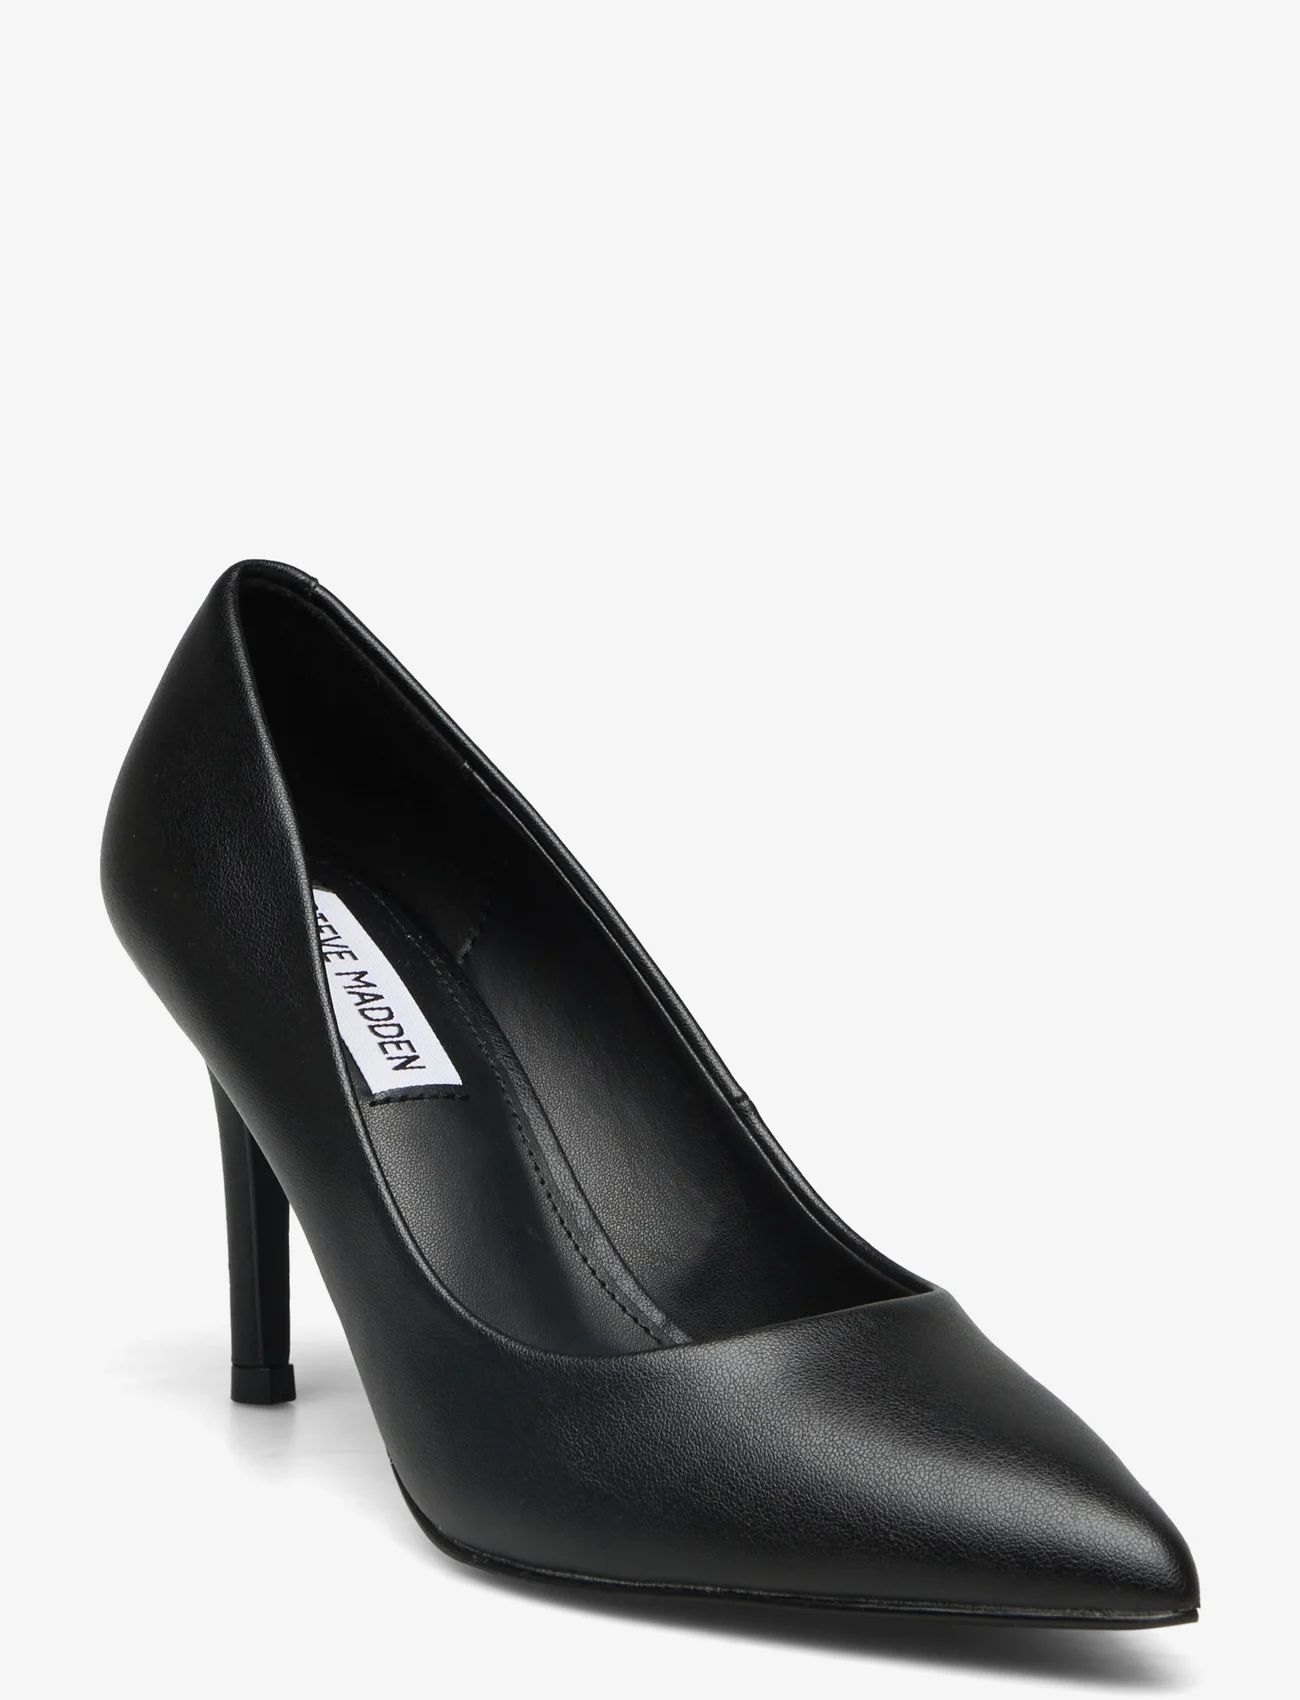 Steve Madden - Ladybug Pump - party wear at outlet prices - black leather - 0